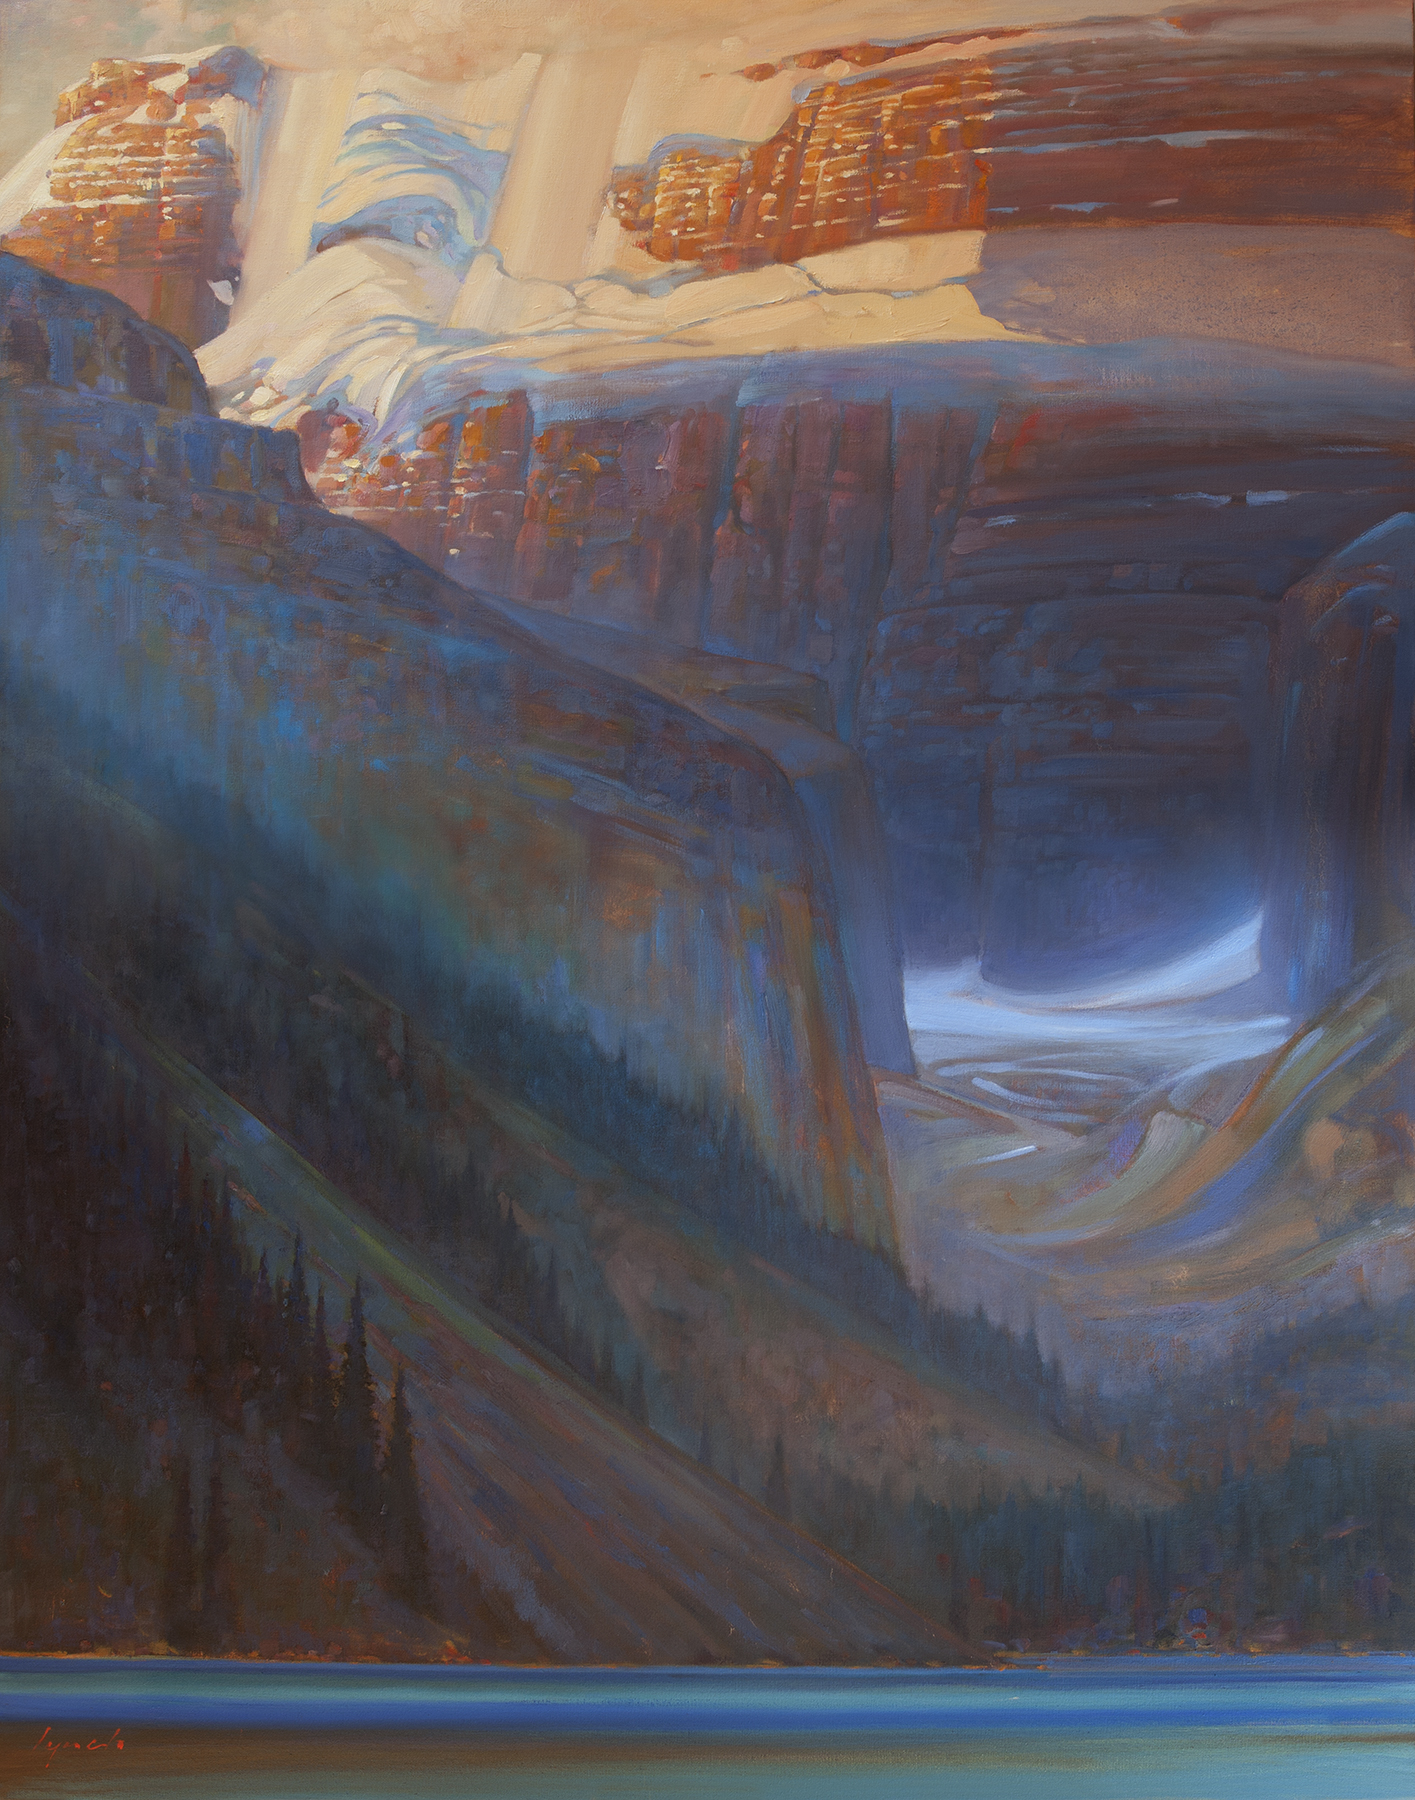 "Rising From Louise' 4 X 5 ft. oil on canvas, Mountain Galleries.